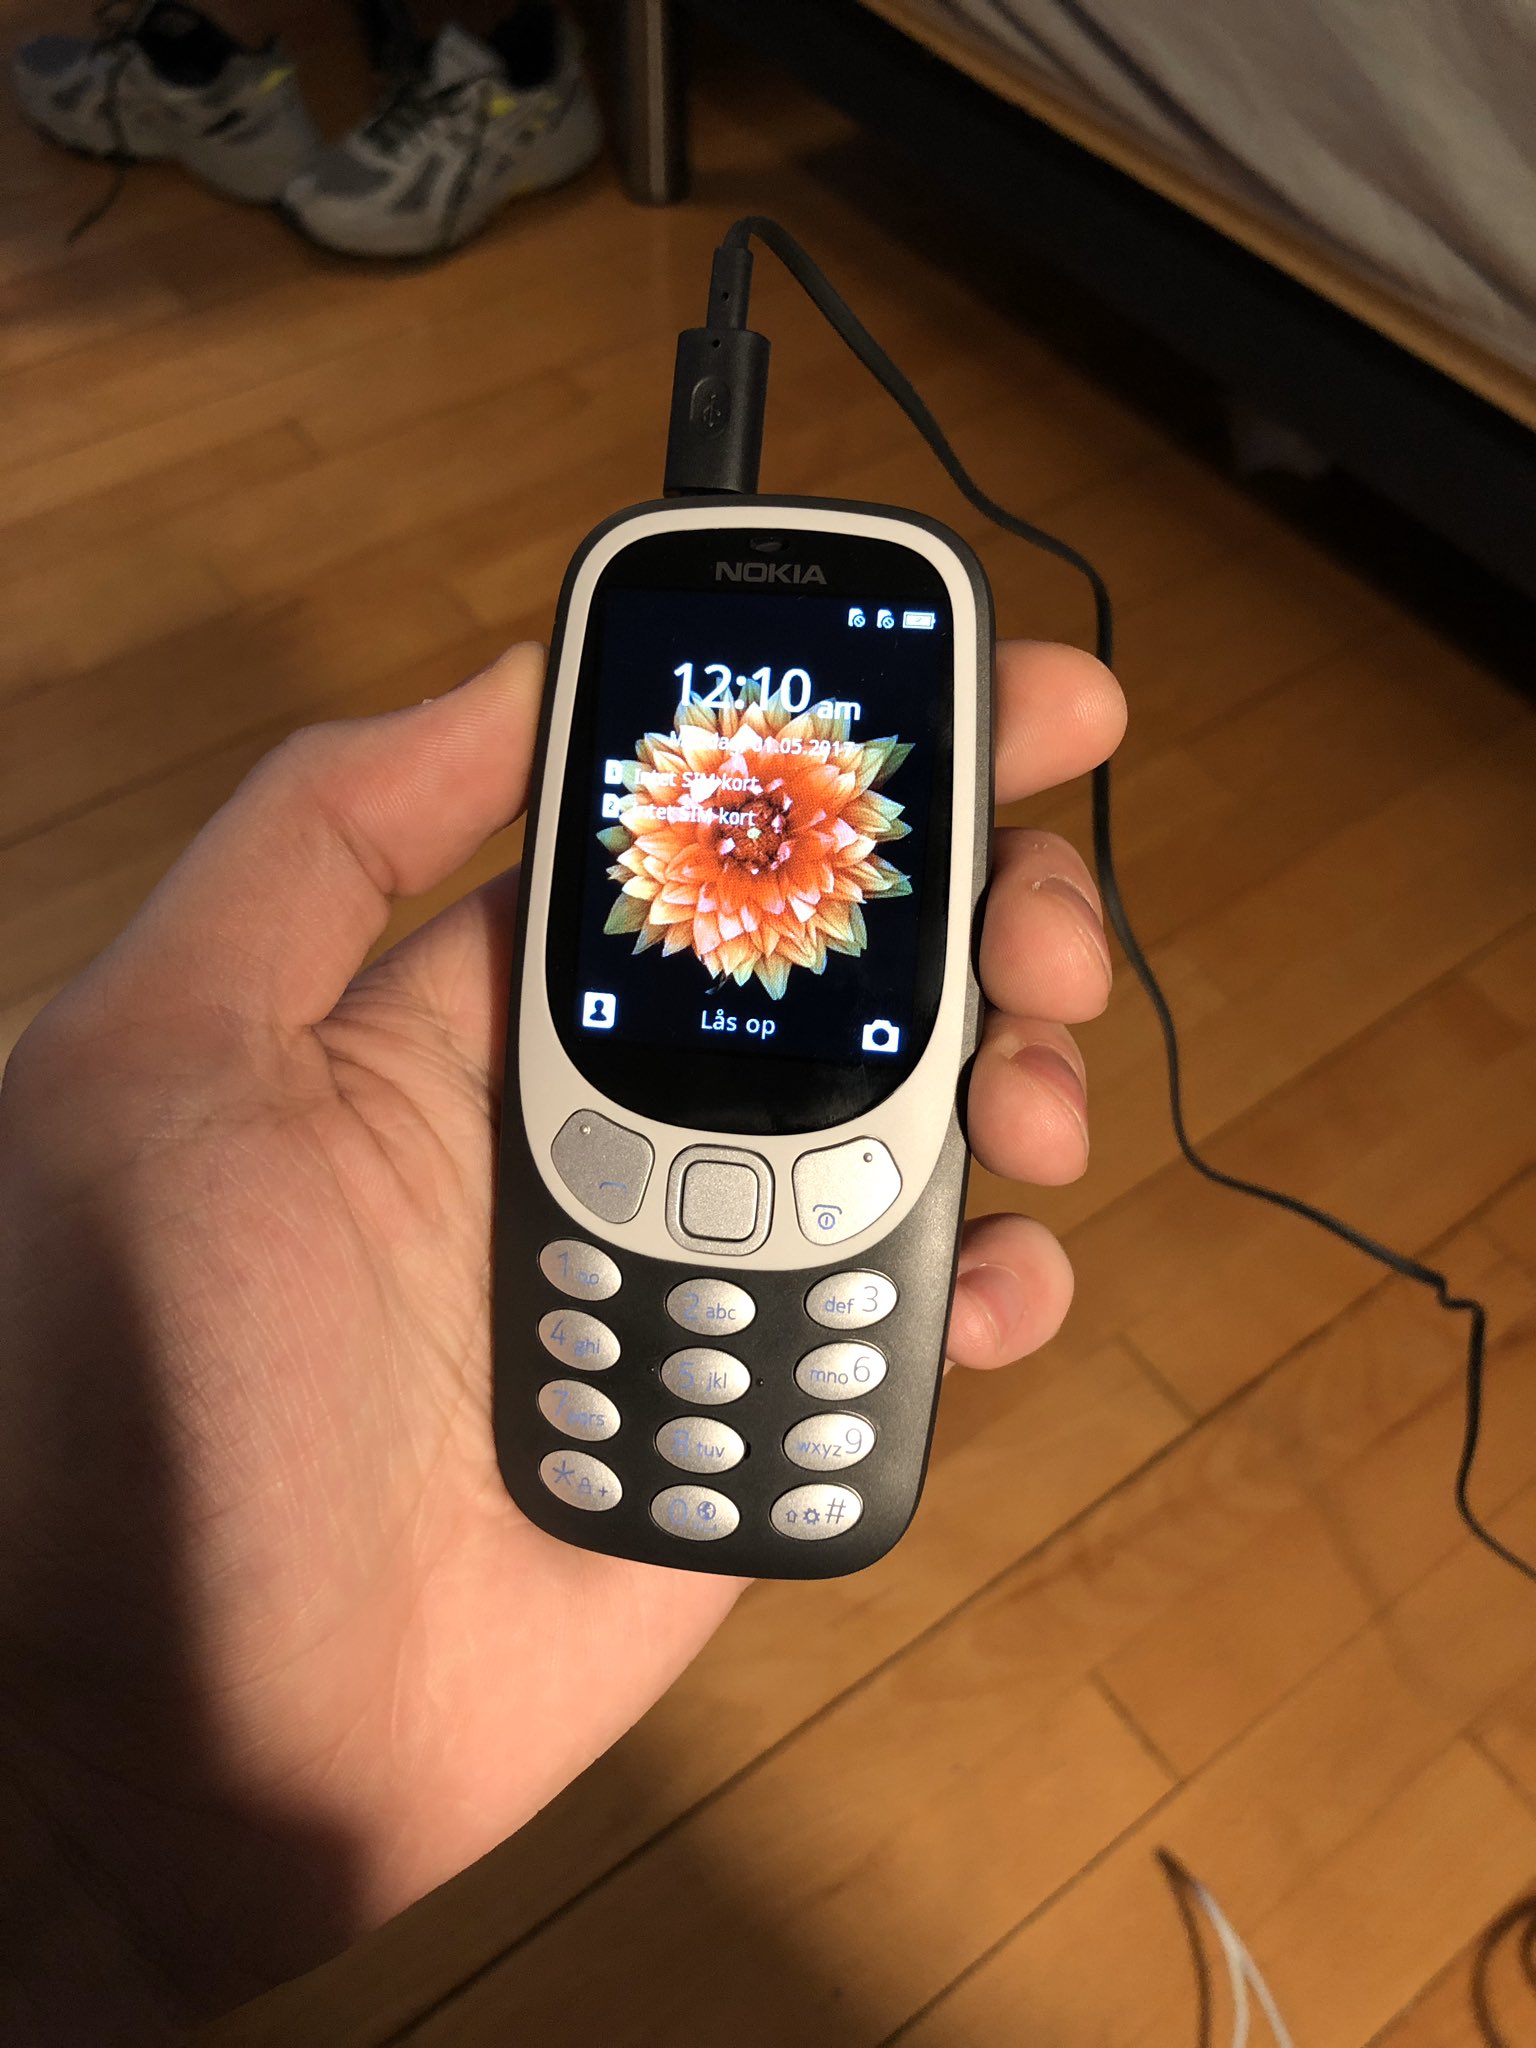 Ulrik Stoch Jensen on out the re-released Nokia 3310! / Twitter